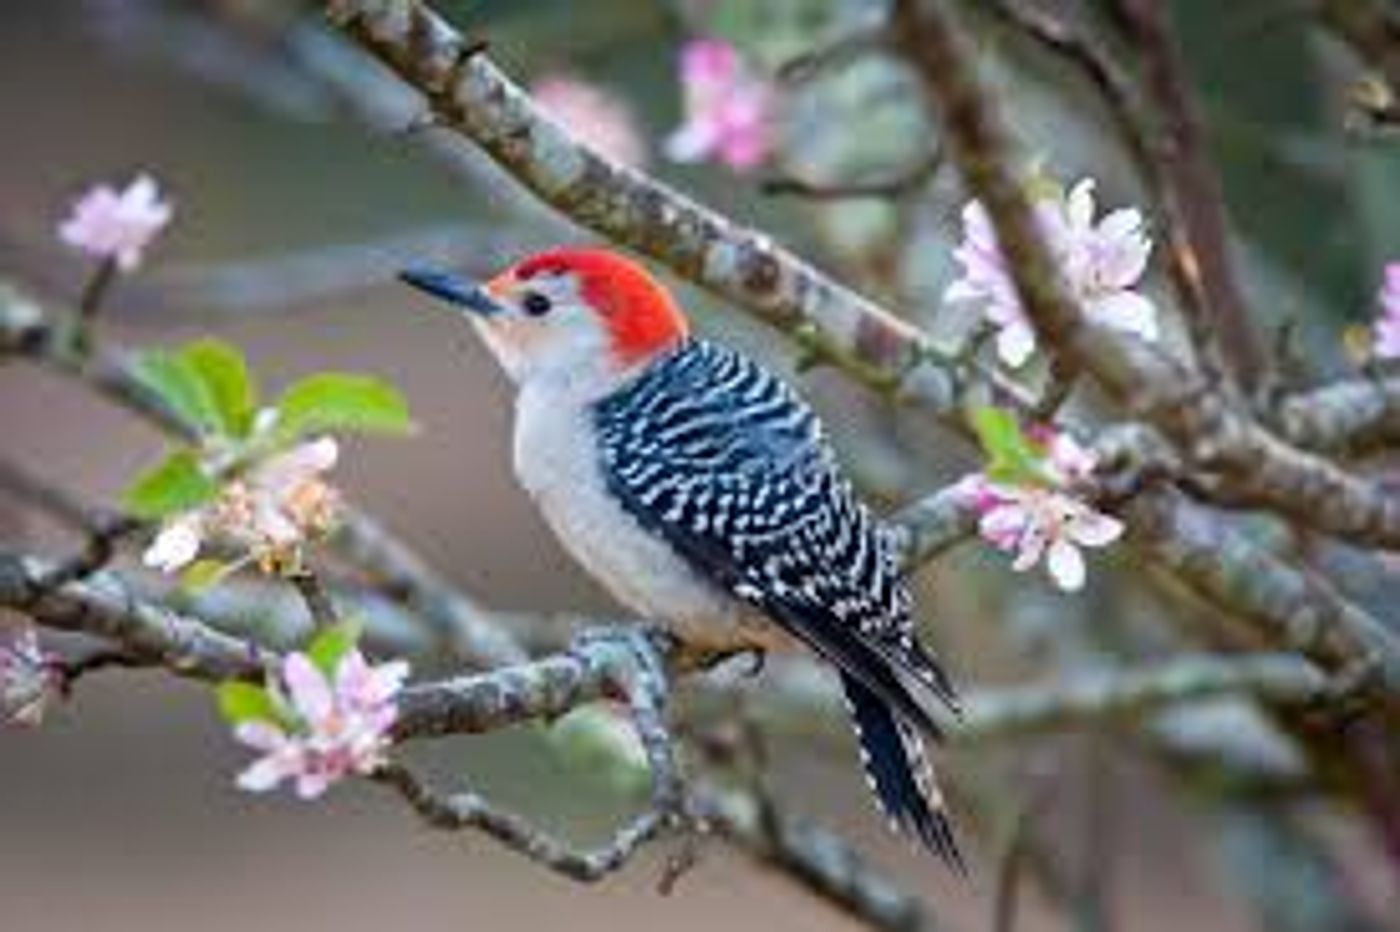 The Red-bellied woodpecker's name deceives it, as there is not actually much red on its breast